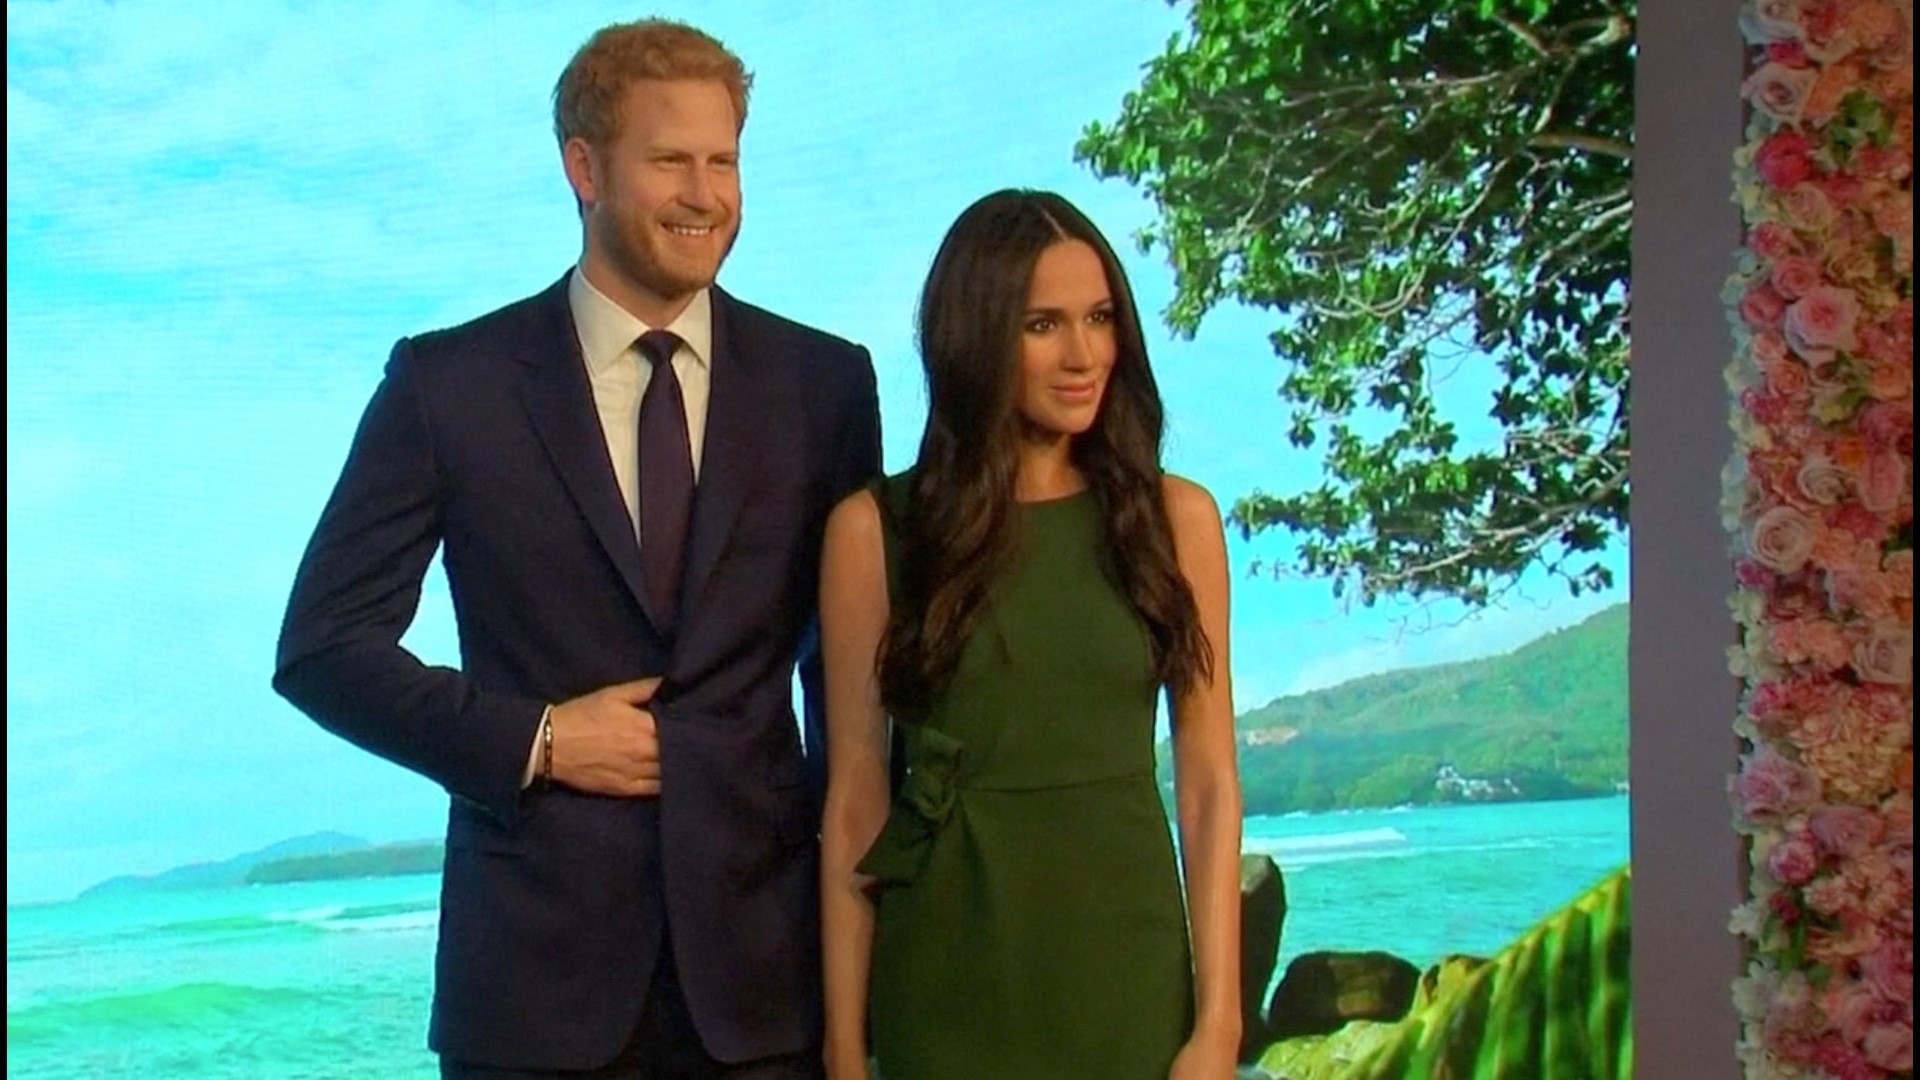 The wax versions of Prince Harry and Meghan Markle have found a new home with the stars, a true reflection of their human-form counterparts. Buzz60's Chloe Hurst has the story!